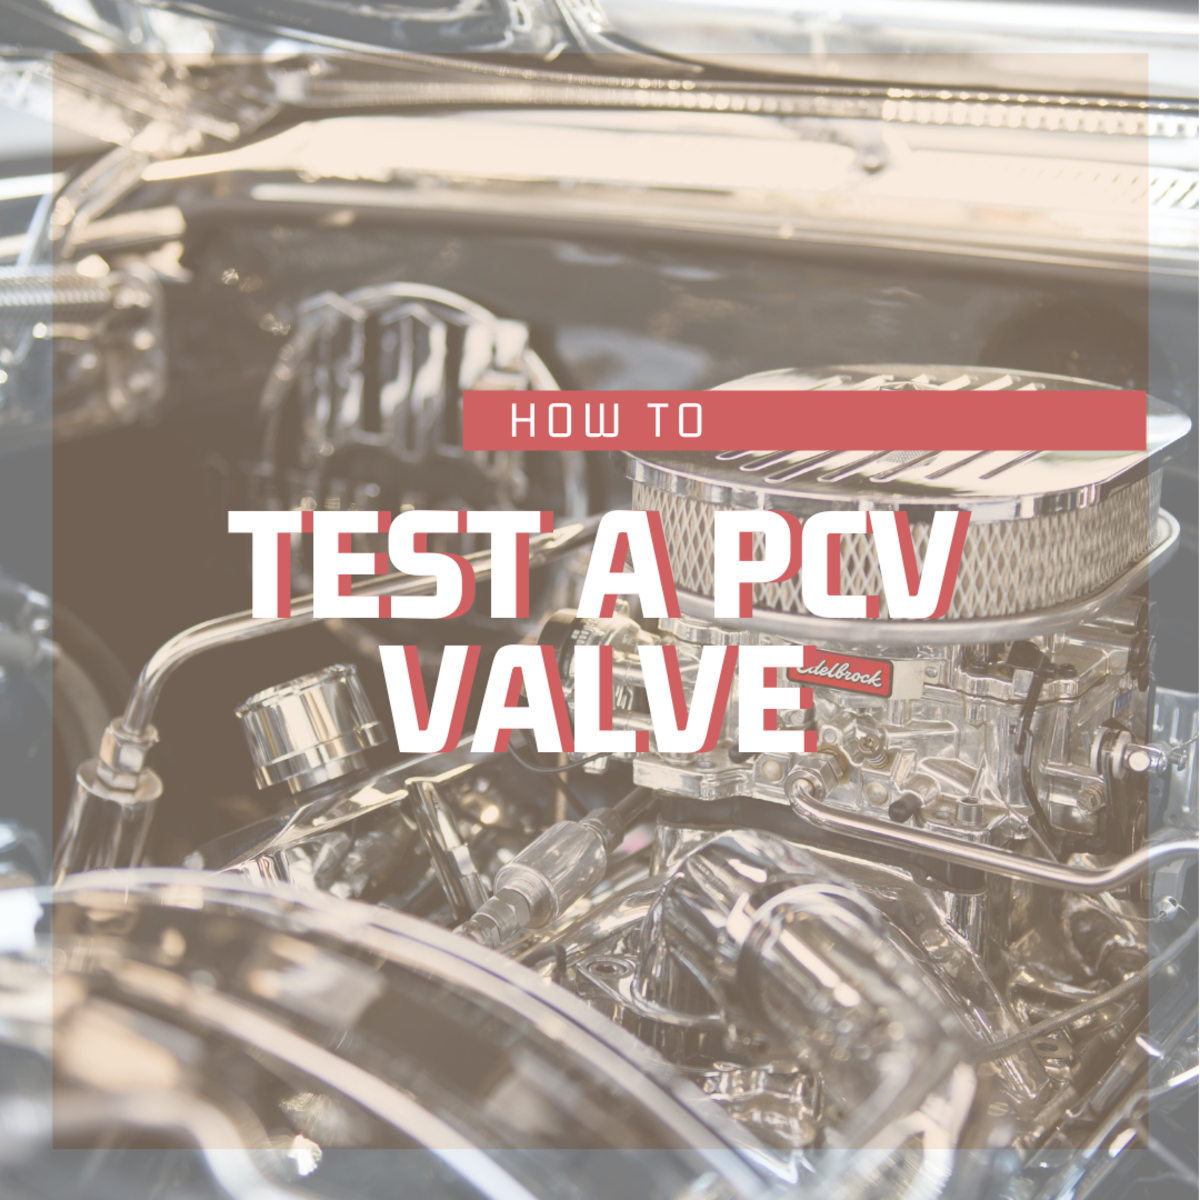 Learn how to diagnose your own PCV valve here.